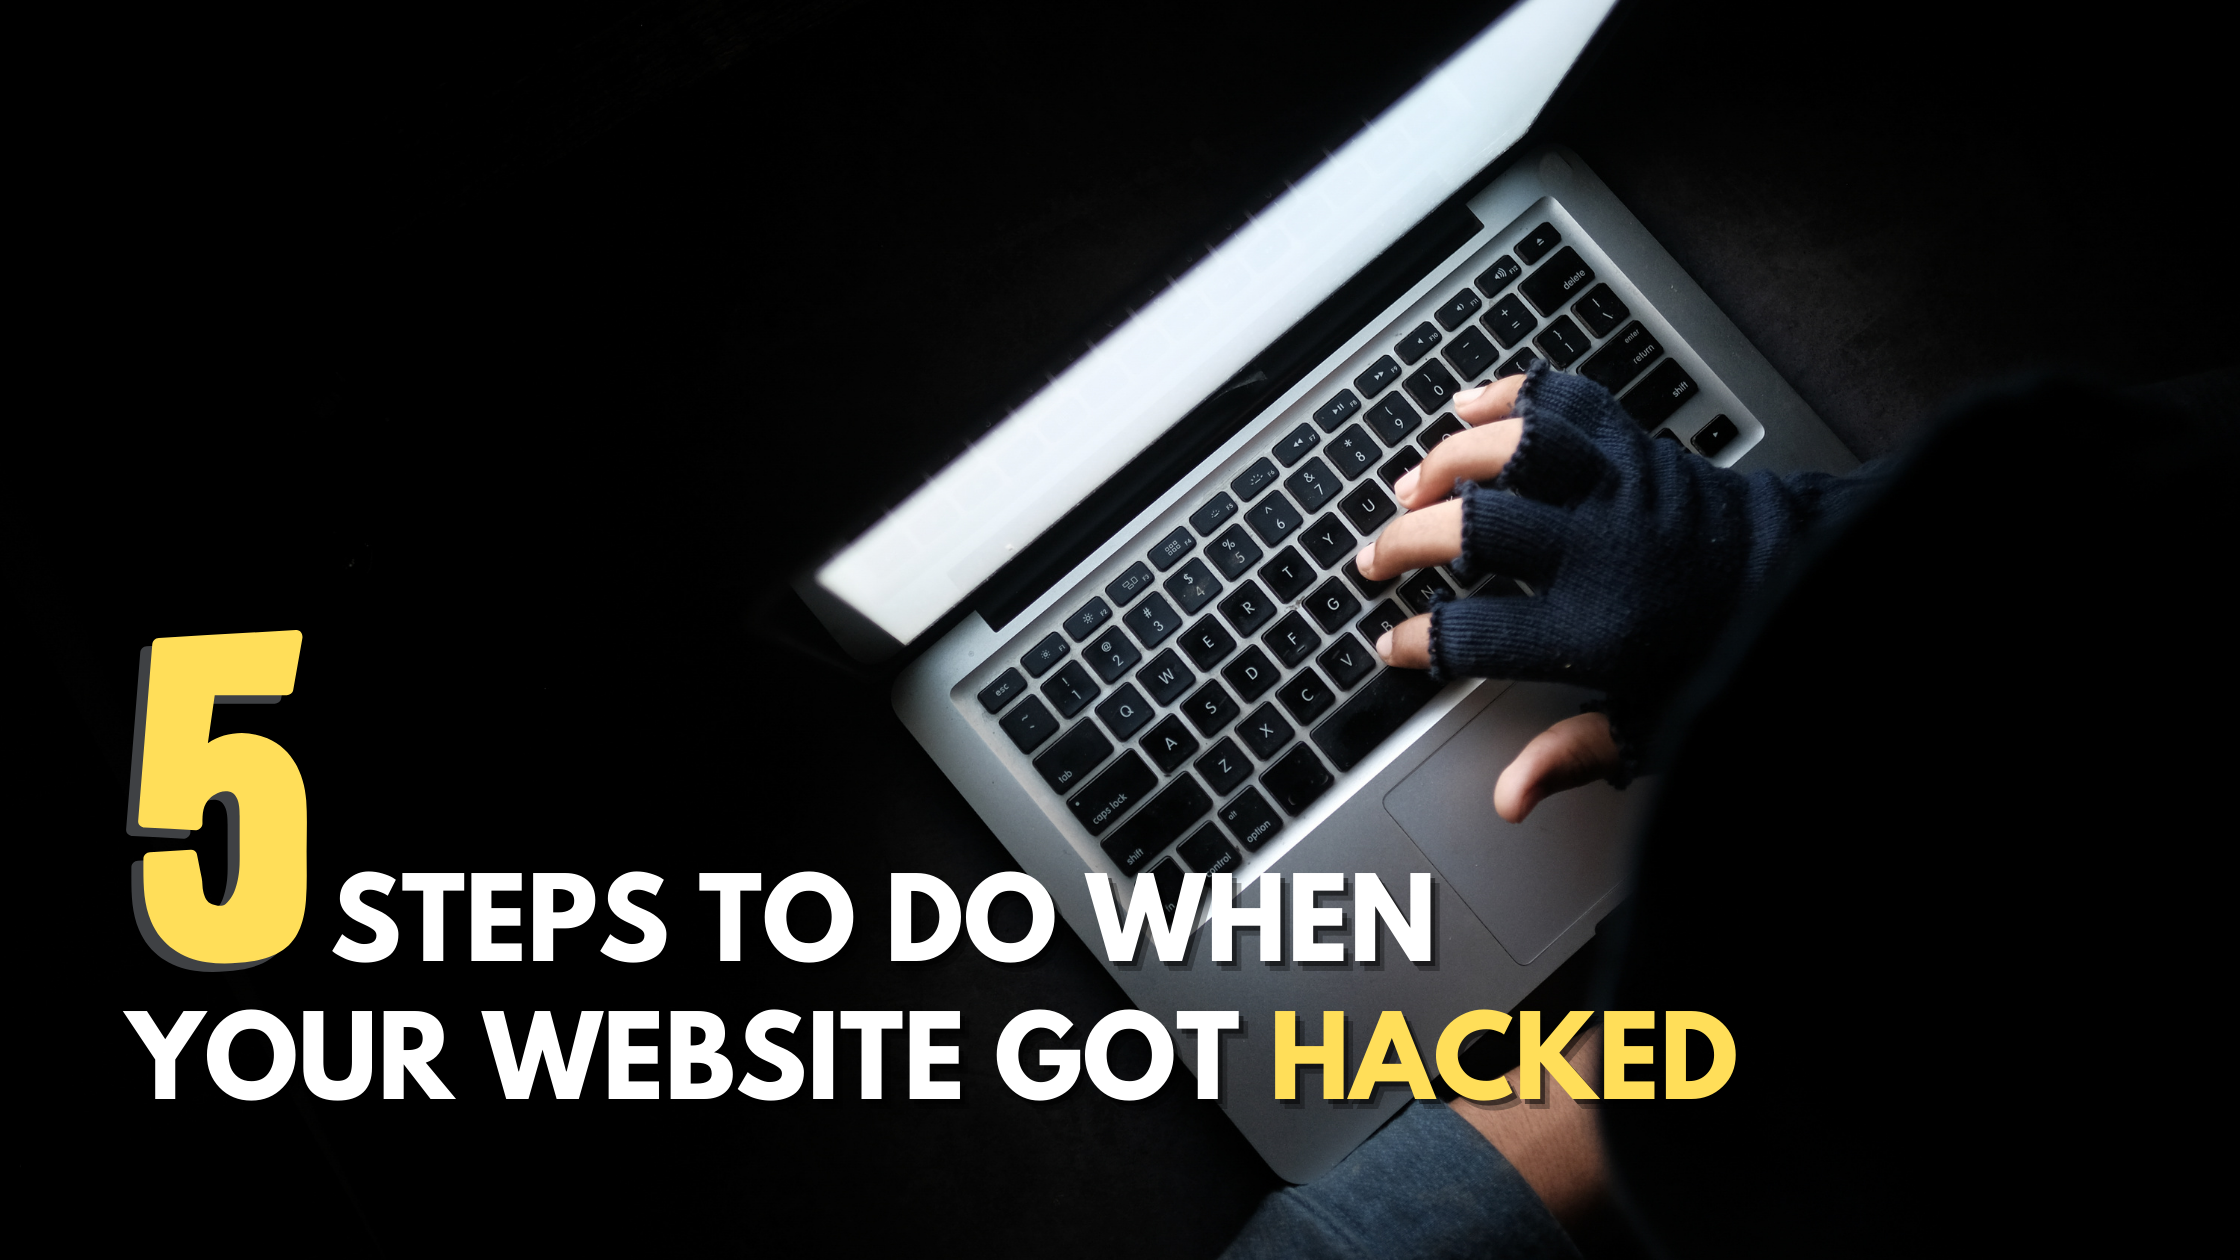 5 Steps To Do When Your Website Got Hacked